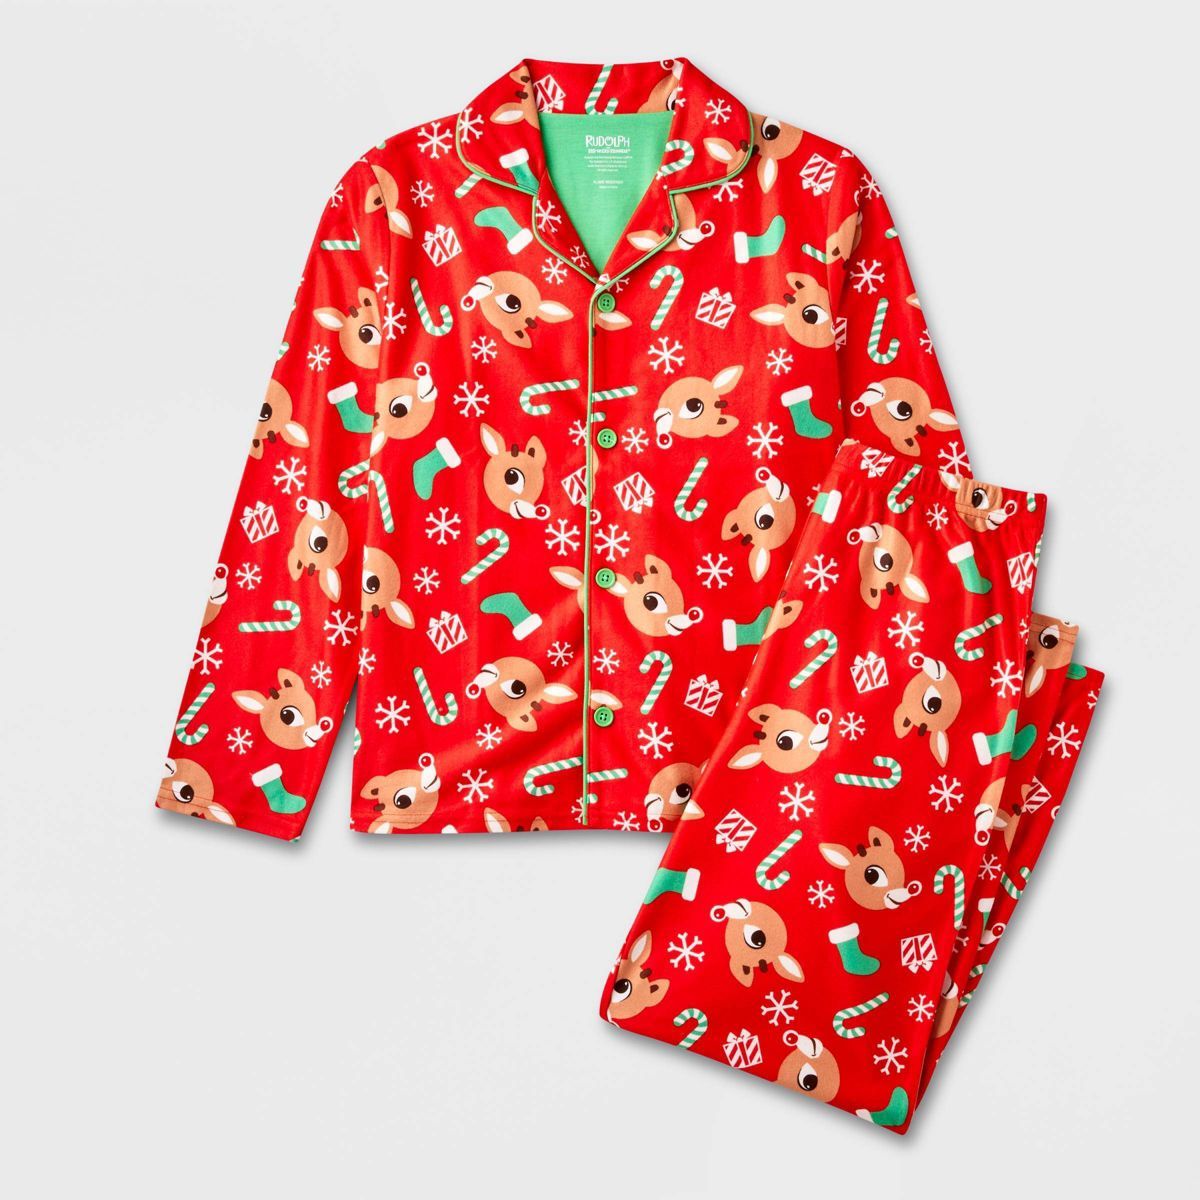 Kids' Rudolph the Red-Nosed Reindeer Christmas Coat Pajama Set - Red | Target